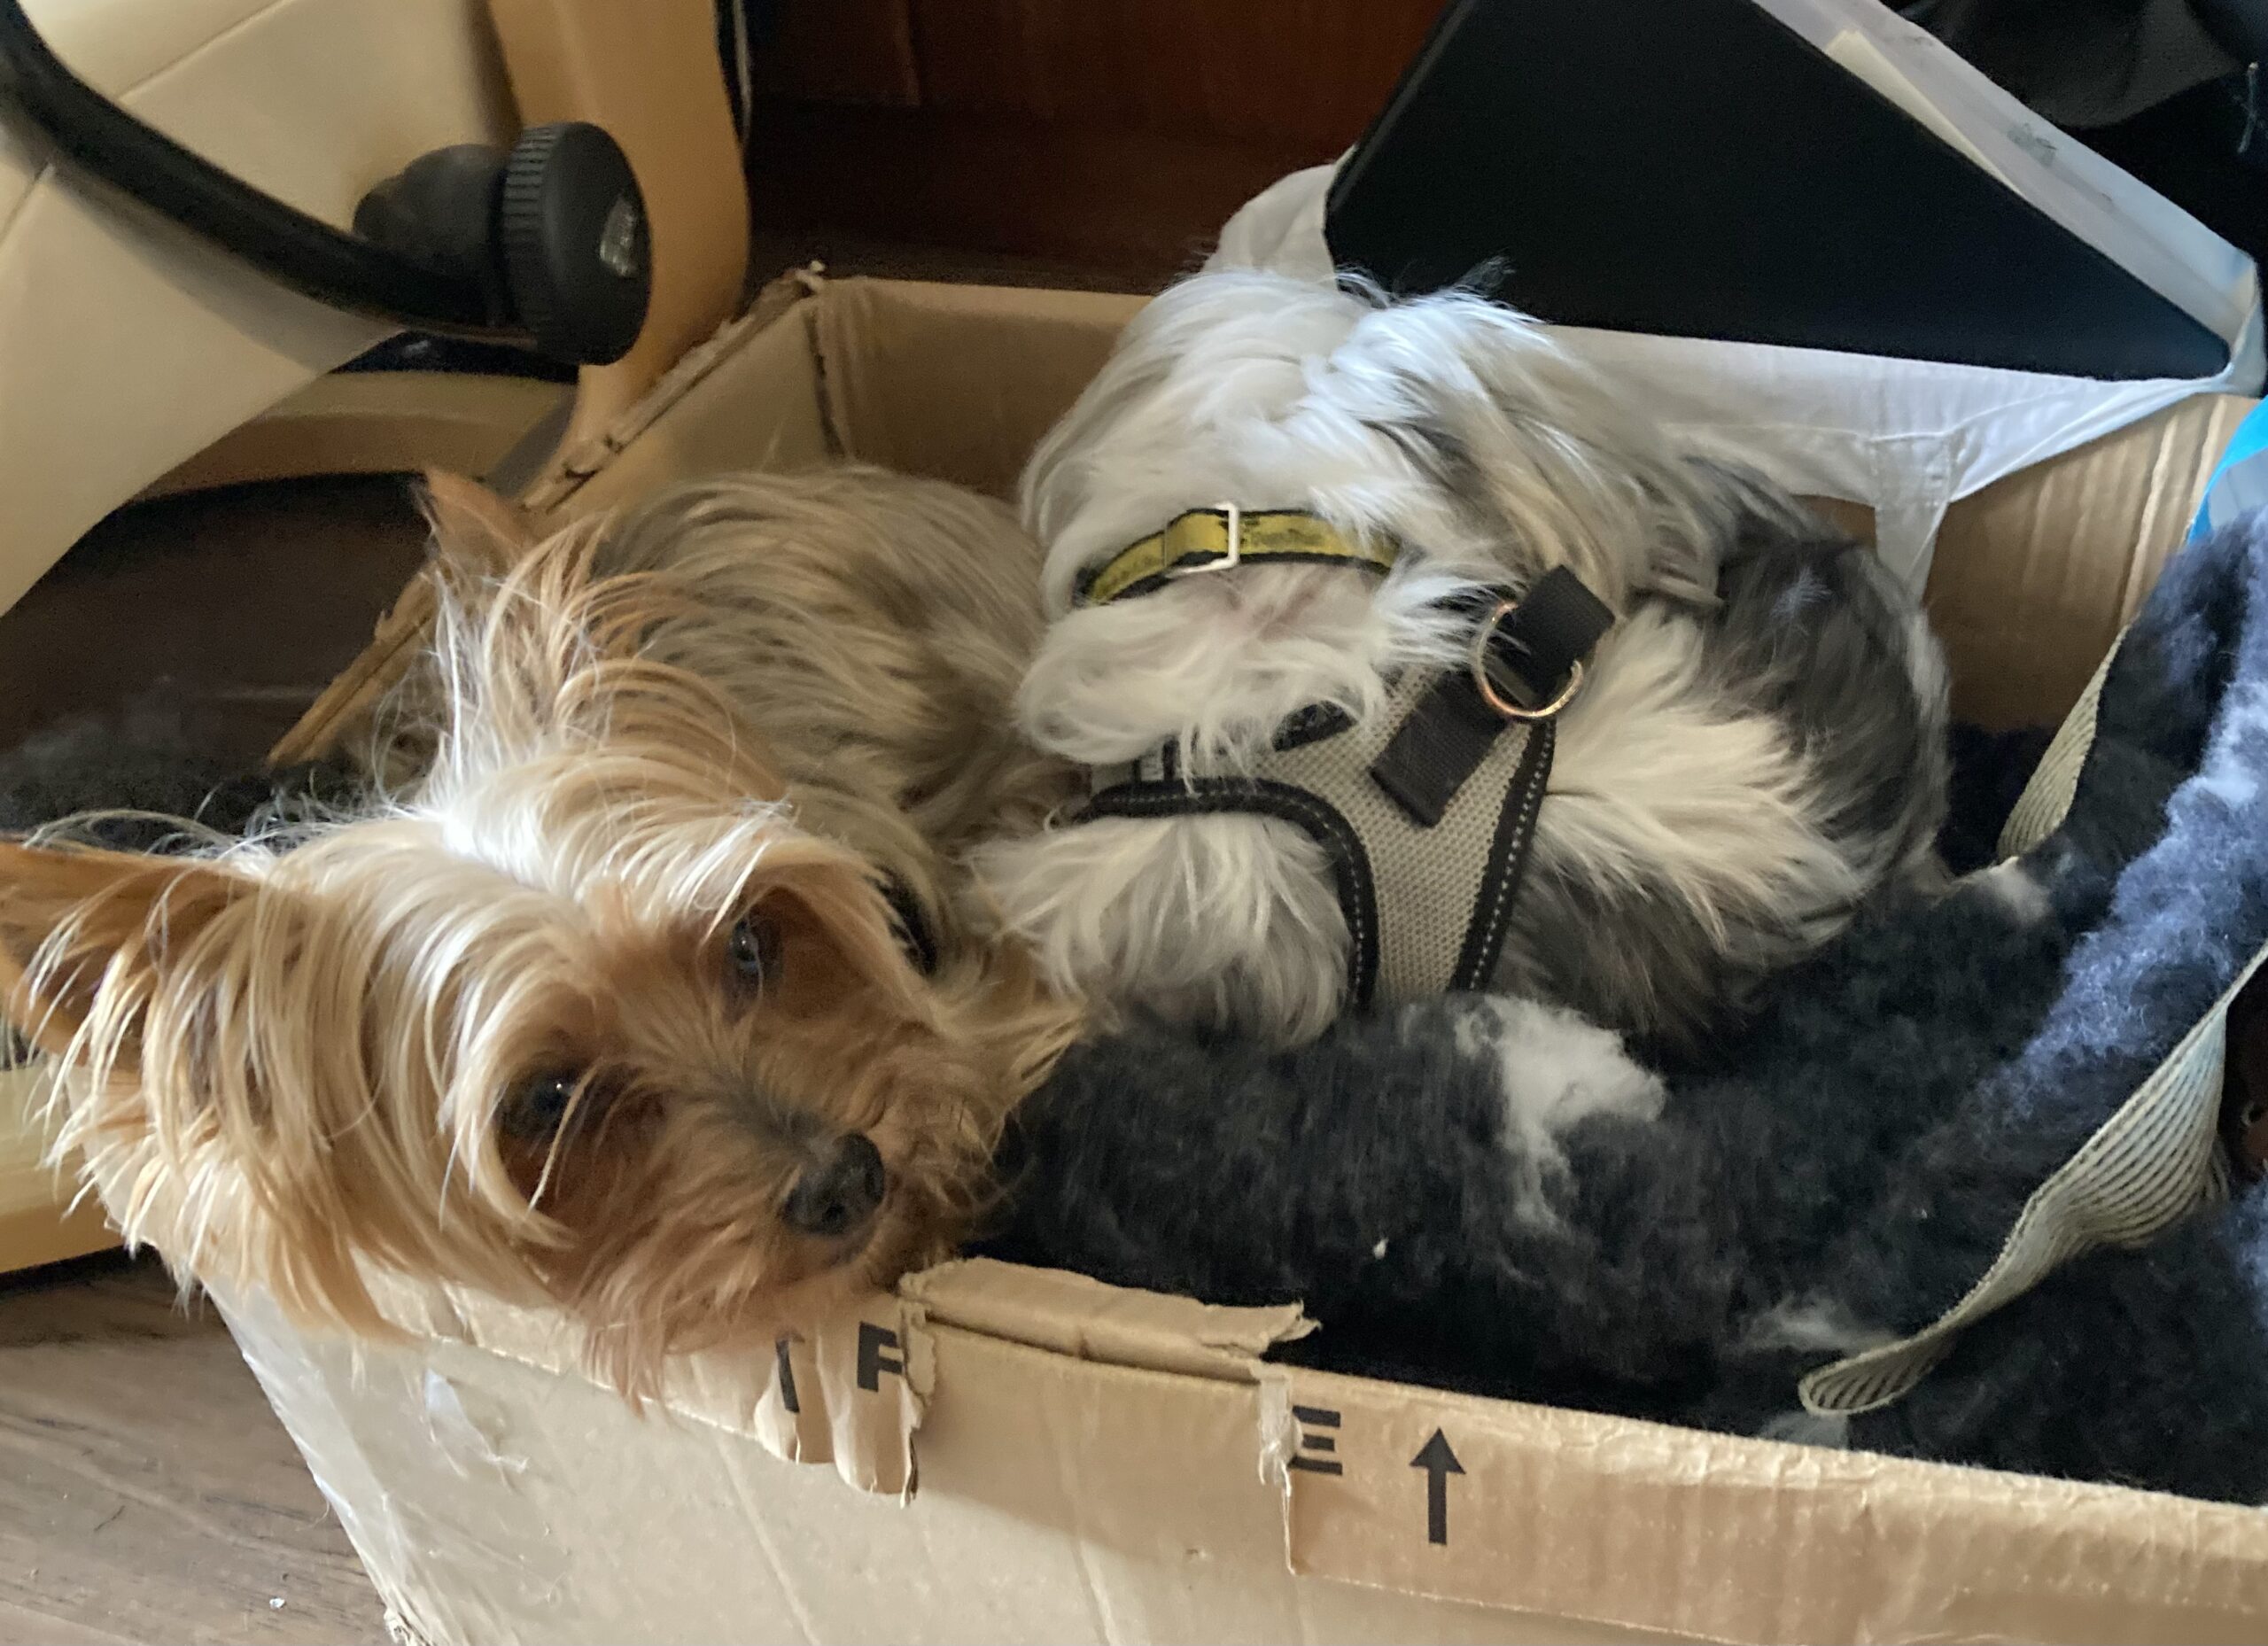 Two small dogs, Flora and Minke, curled up inside a packing box